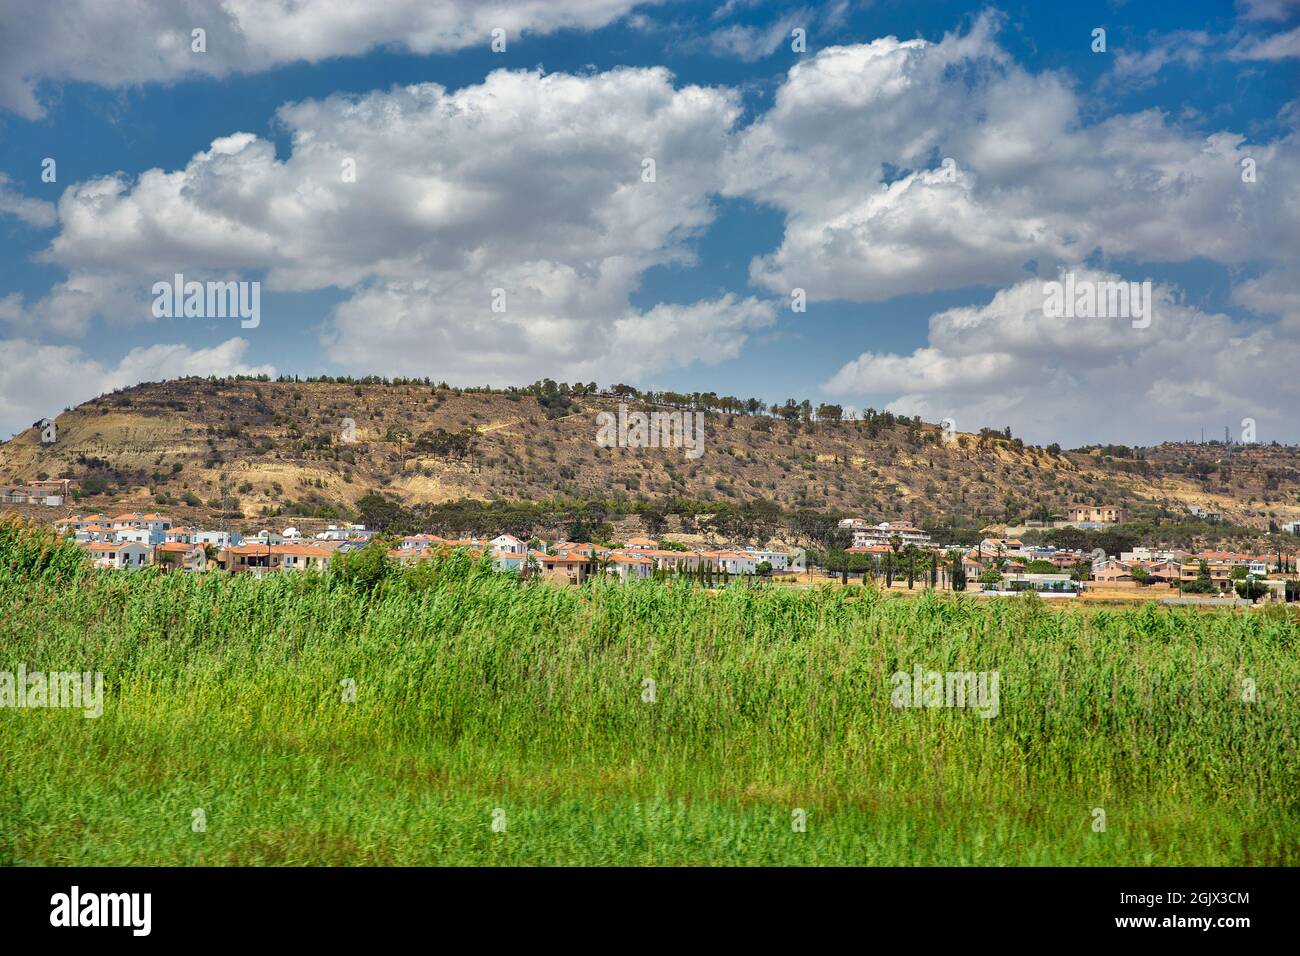 Typical Cypriot summer landscape wit village and hills close to Larnaca, Cyprus. Stock Photo